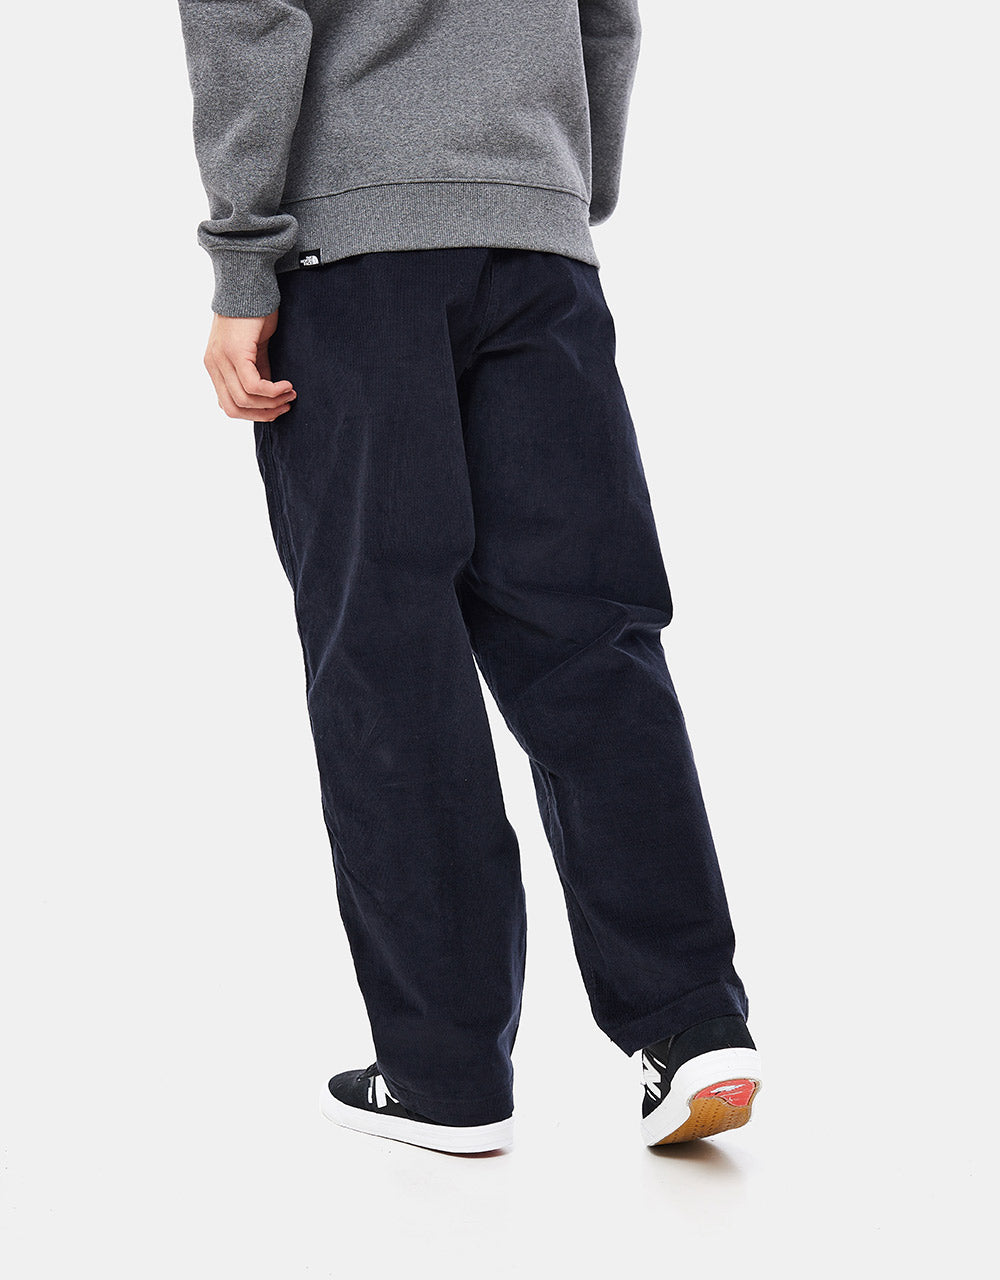 Levis Skateboarding Quick Release Pant - Anthracite Night